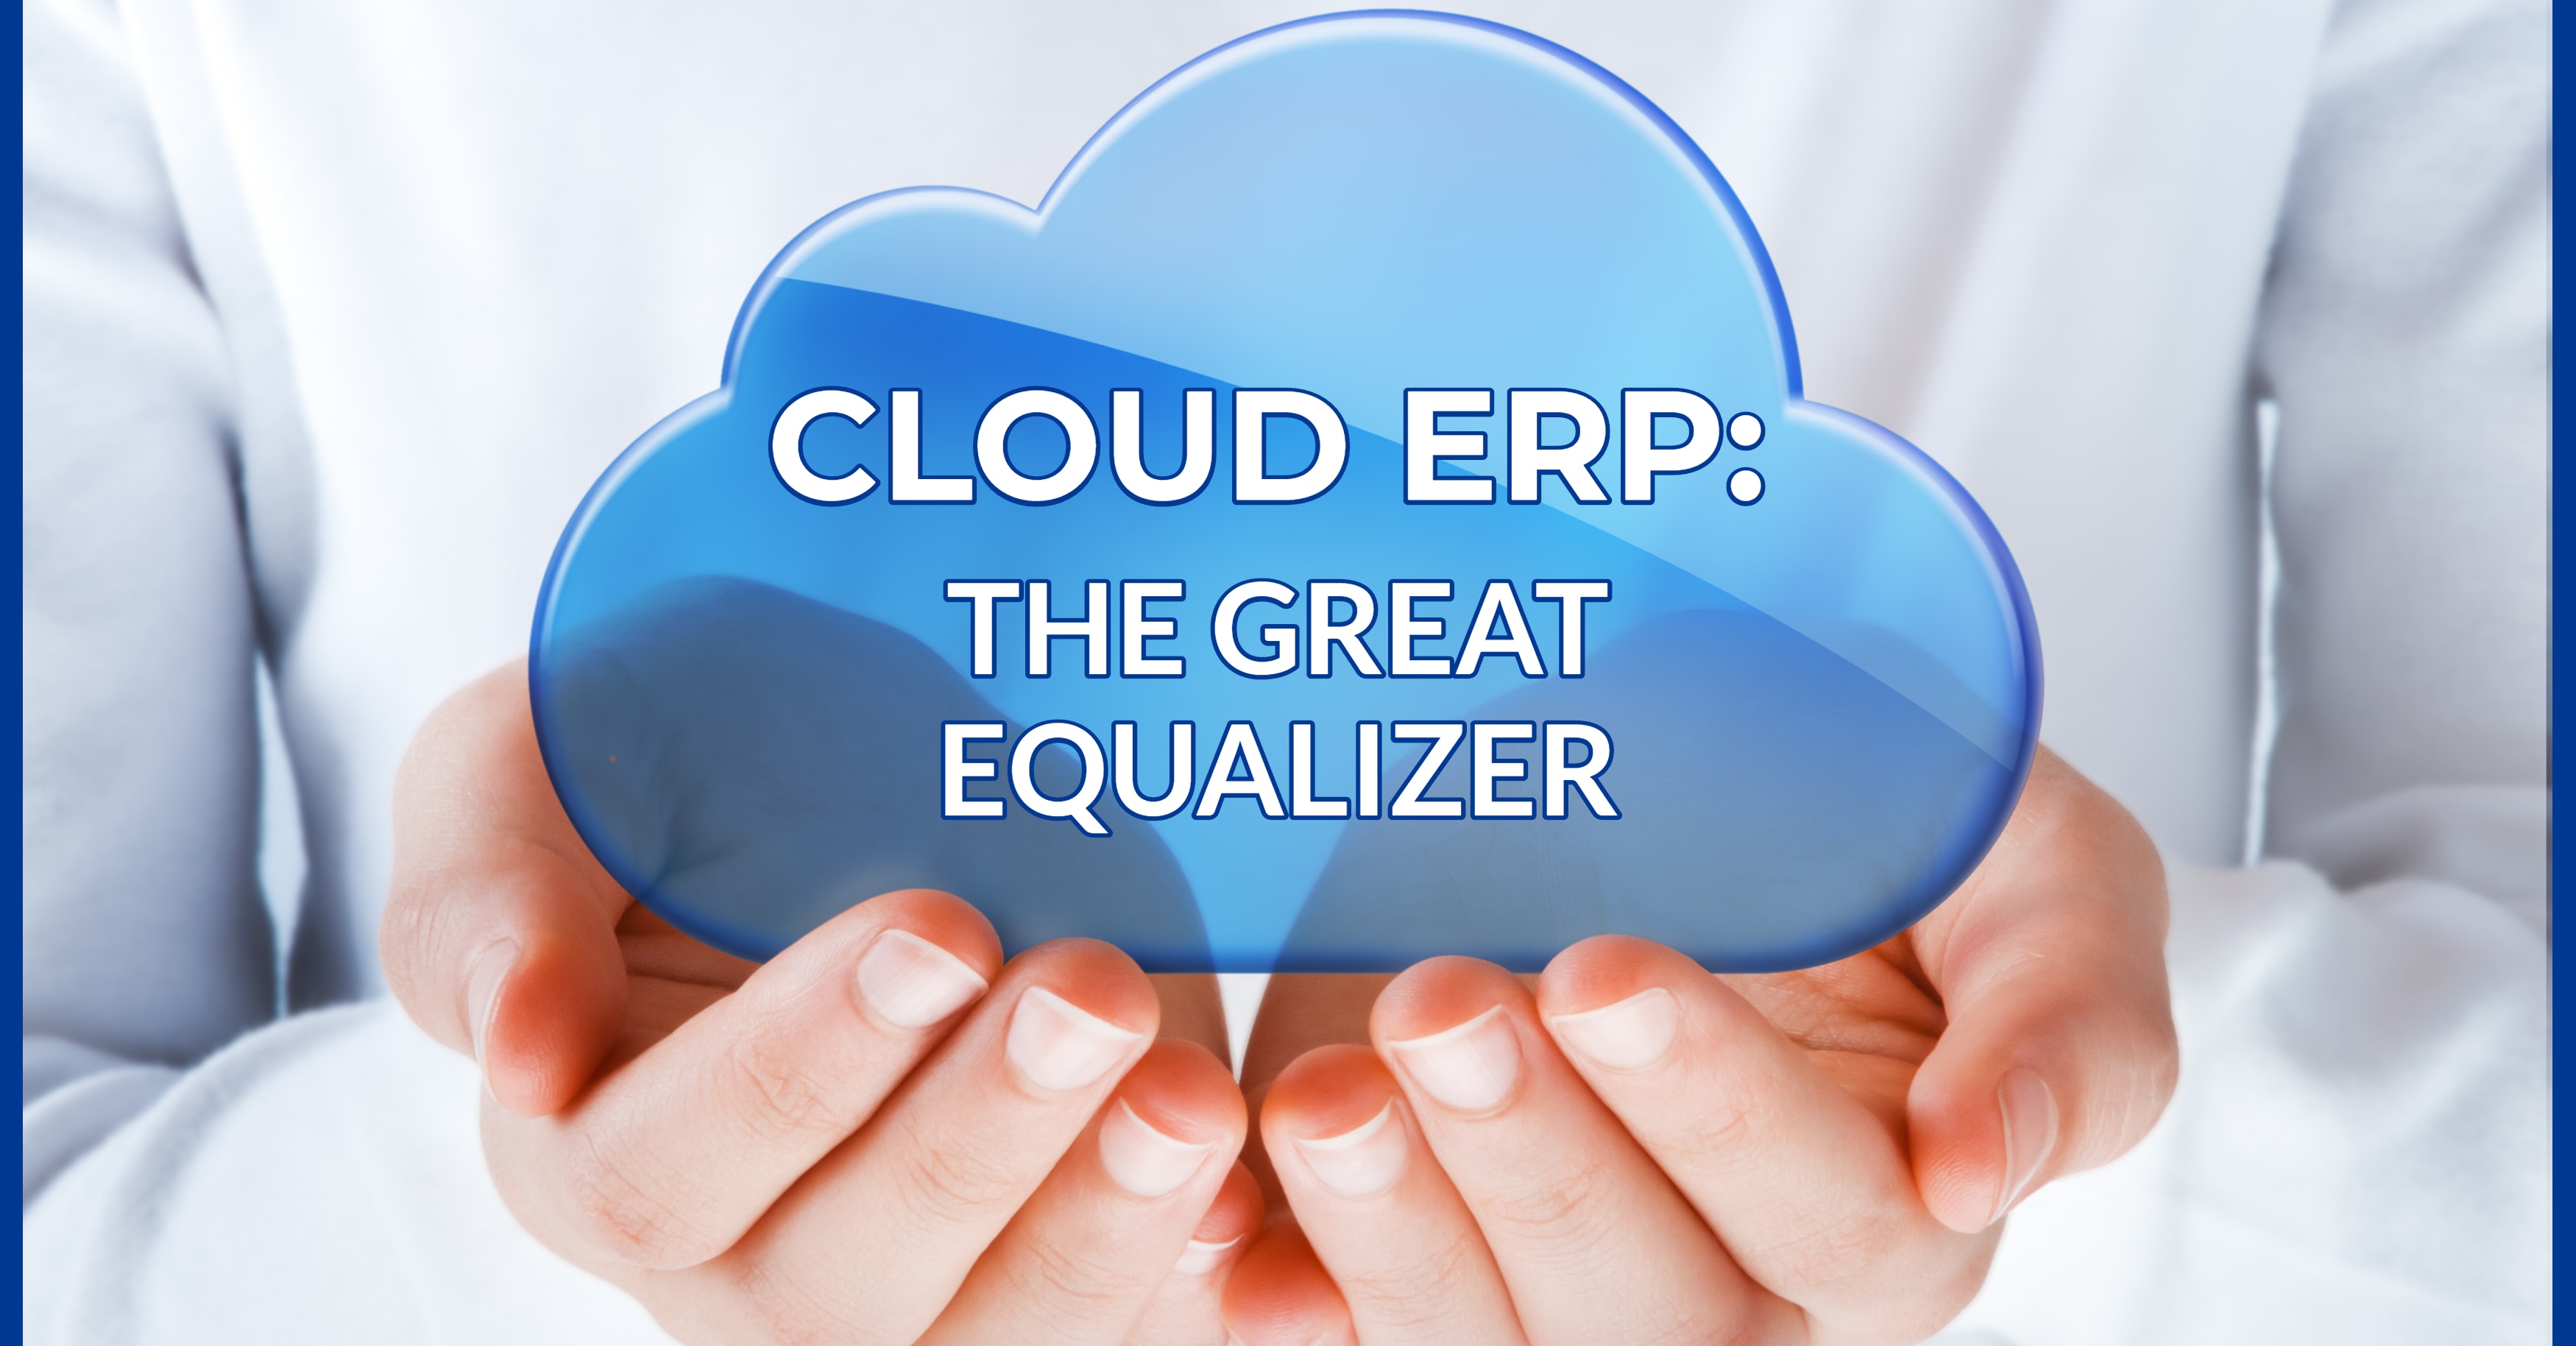 Cloud ERP Great Equalizer